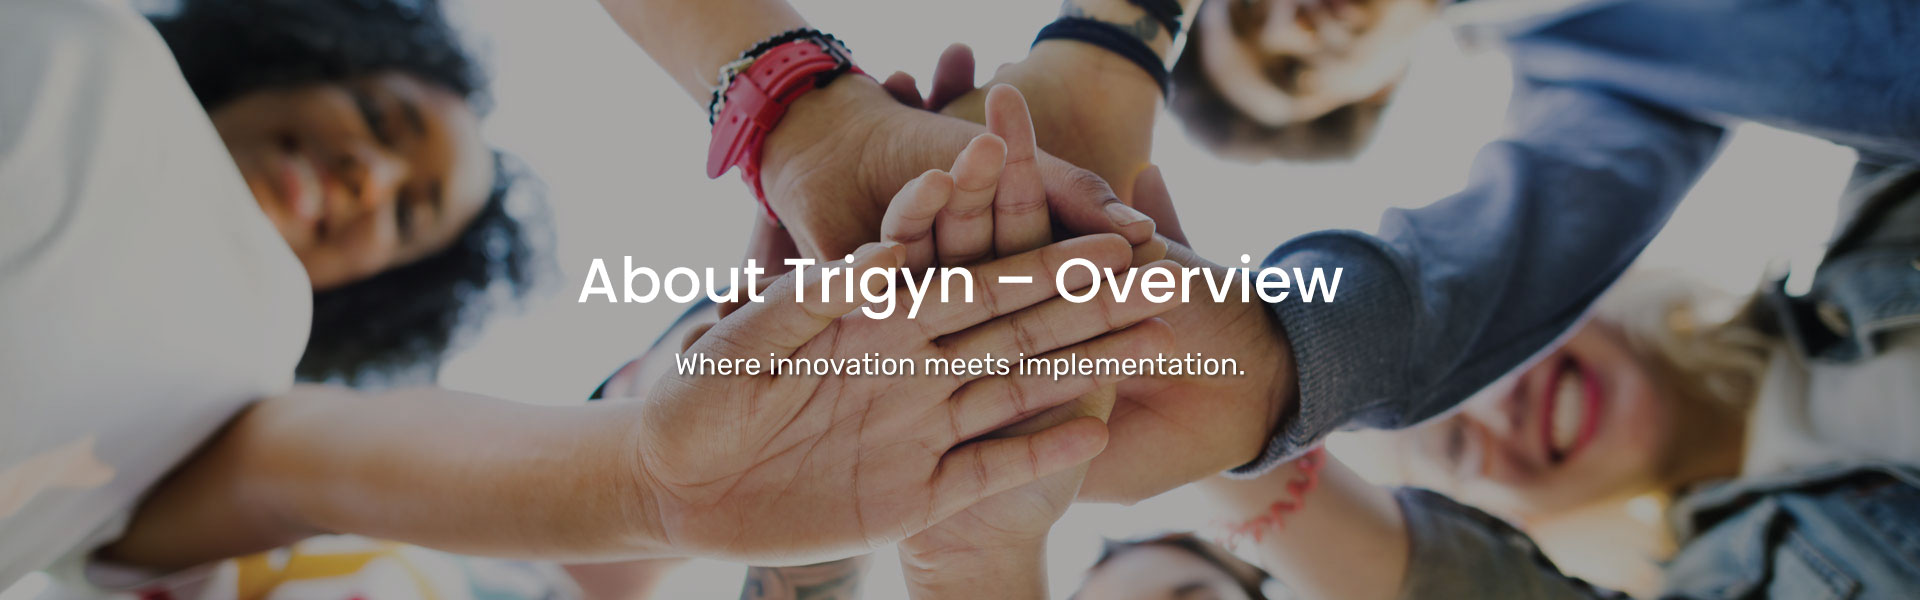 About Trigyn - Overview